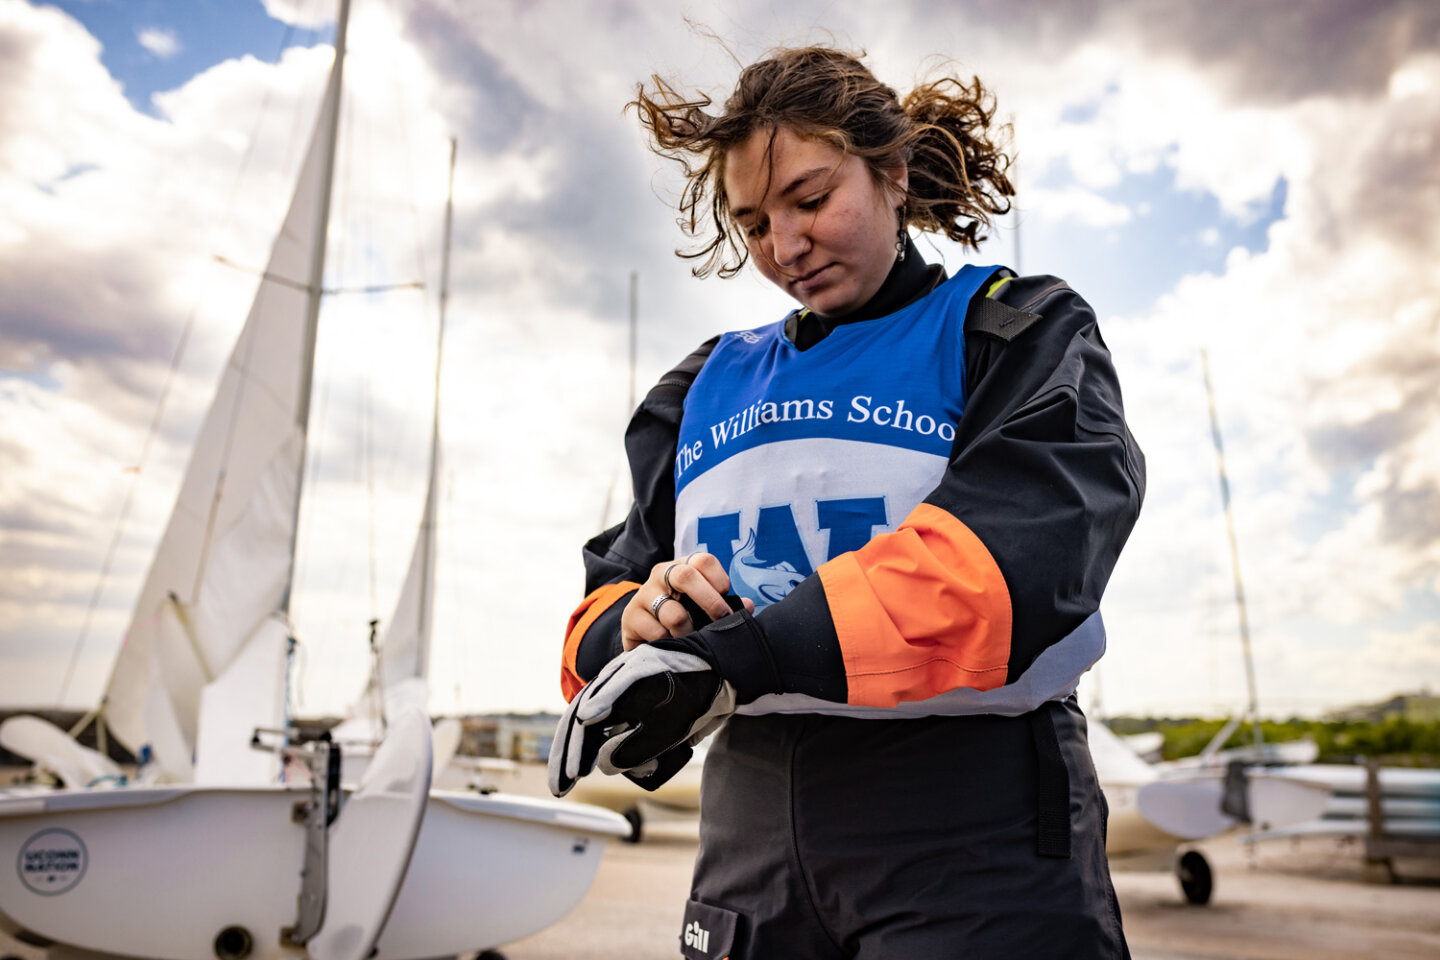 Williams school sailing student puts on their gloves on a windy day at the marina